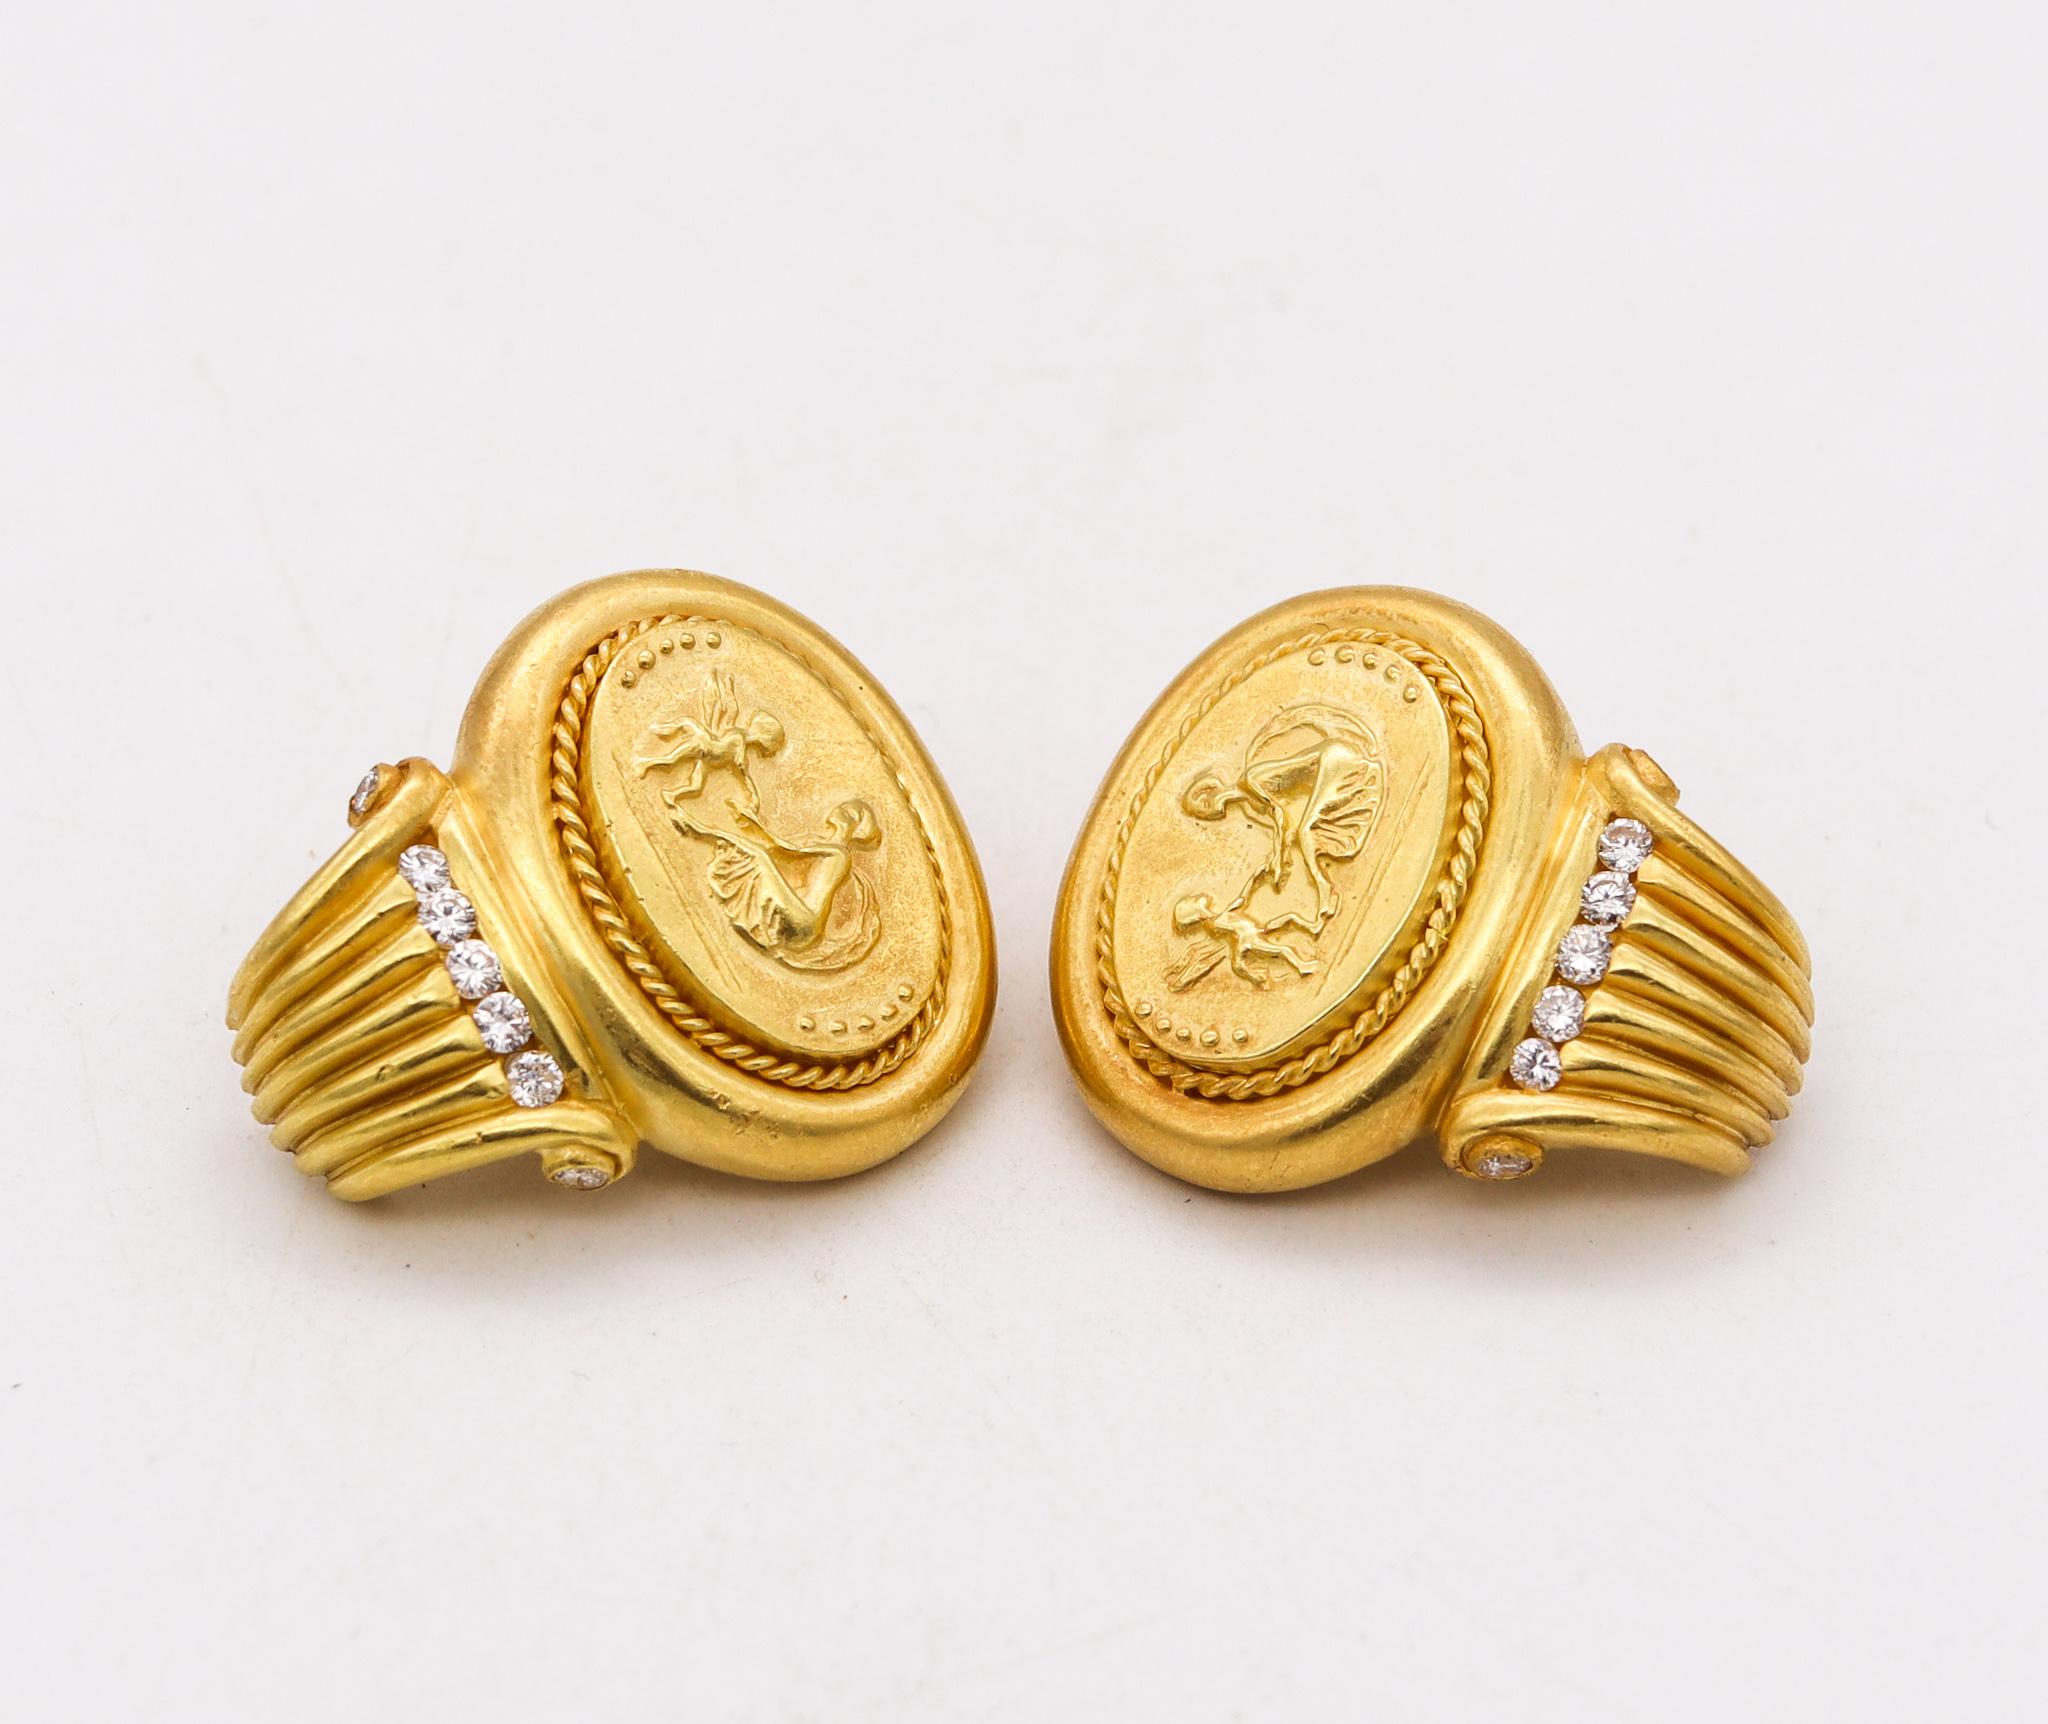 Etruscan Revival SeidenGang Roman Revival Classic Earrings In 18Kt Yellow Gold With VS Diamonds For Sale